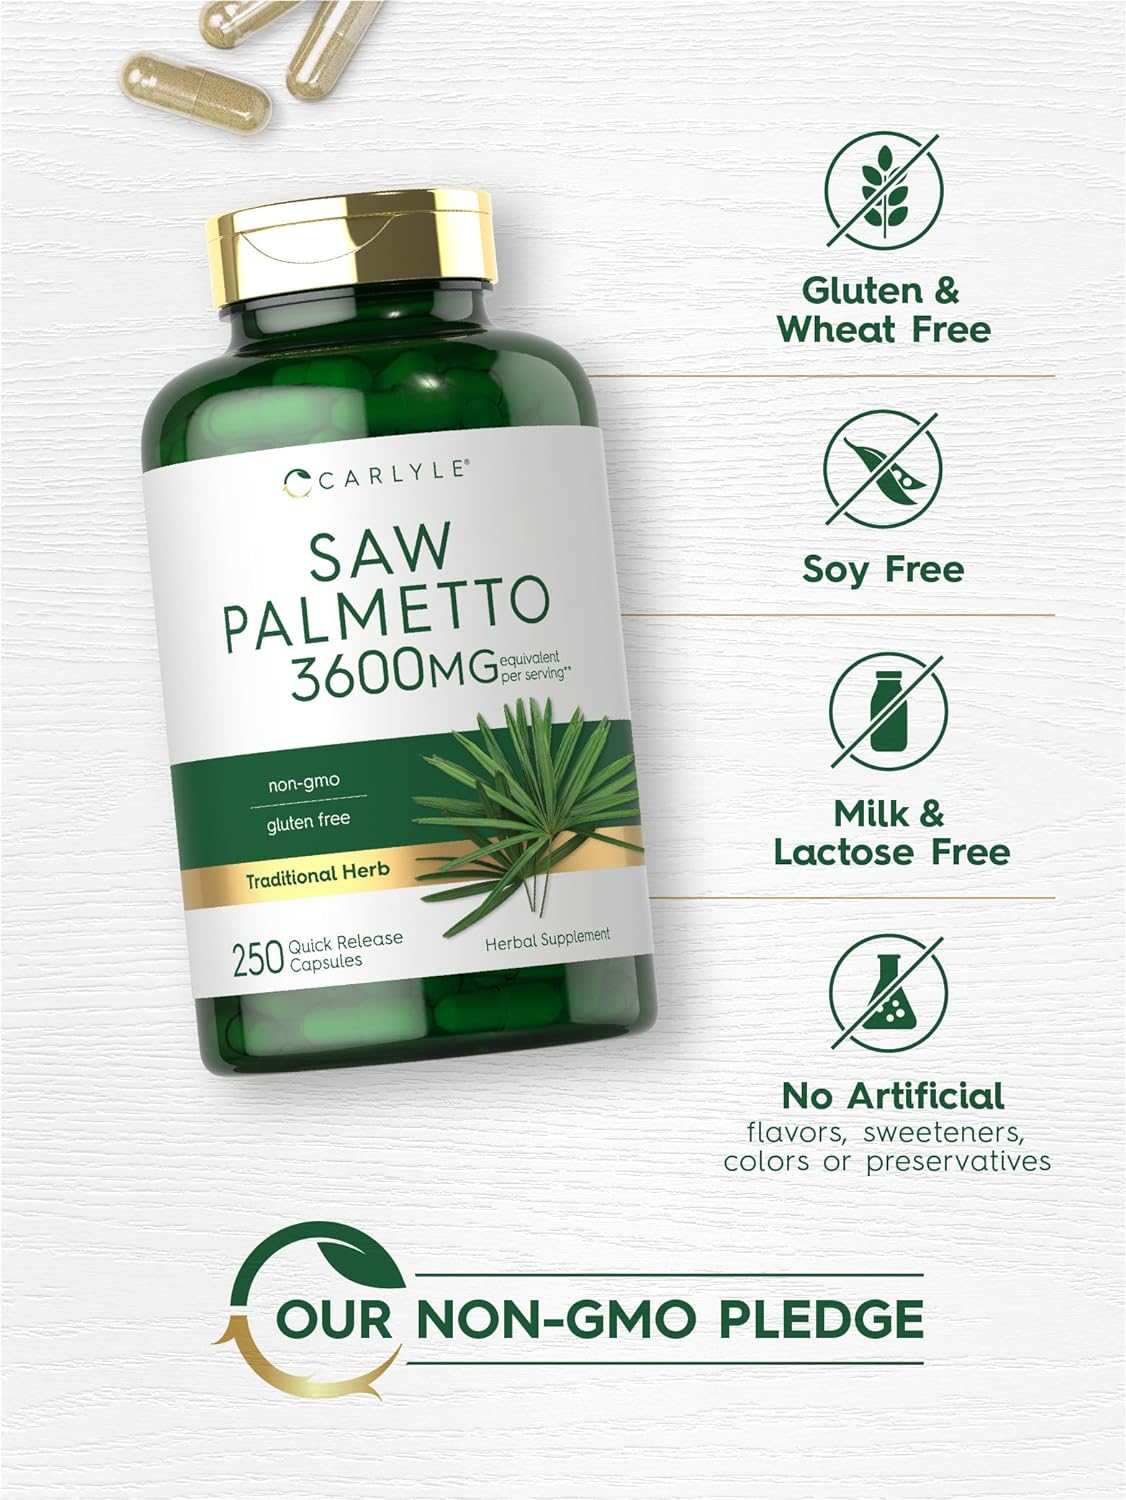  Carlyle Saw Palmetto Extract | 3600mg | 250 Capsules | Non-